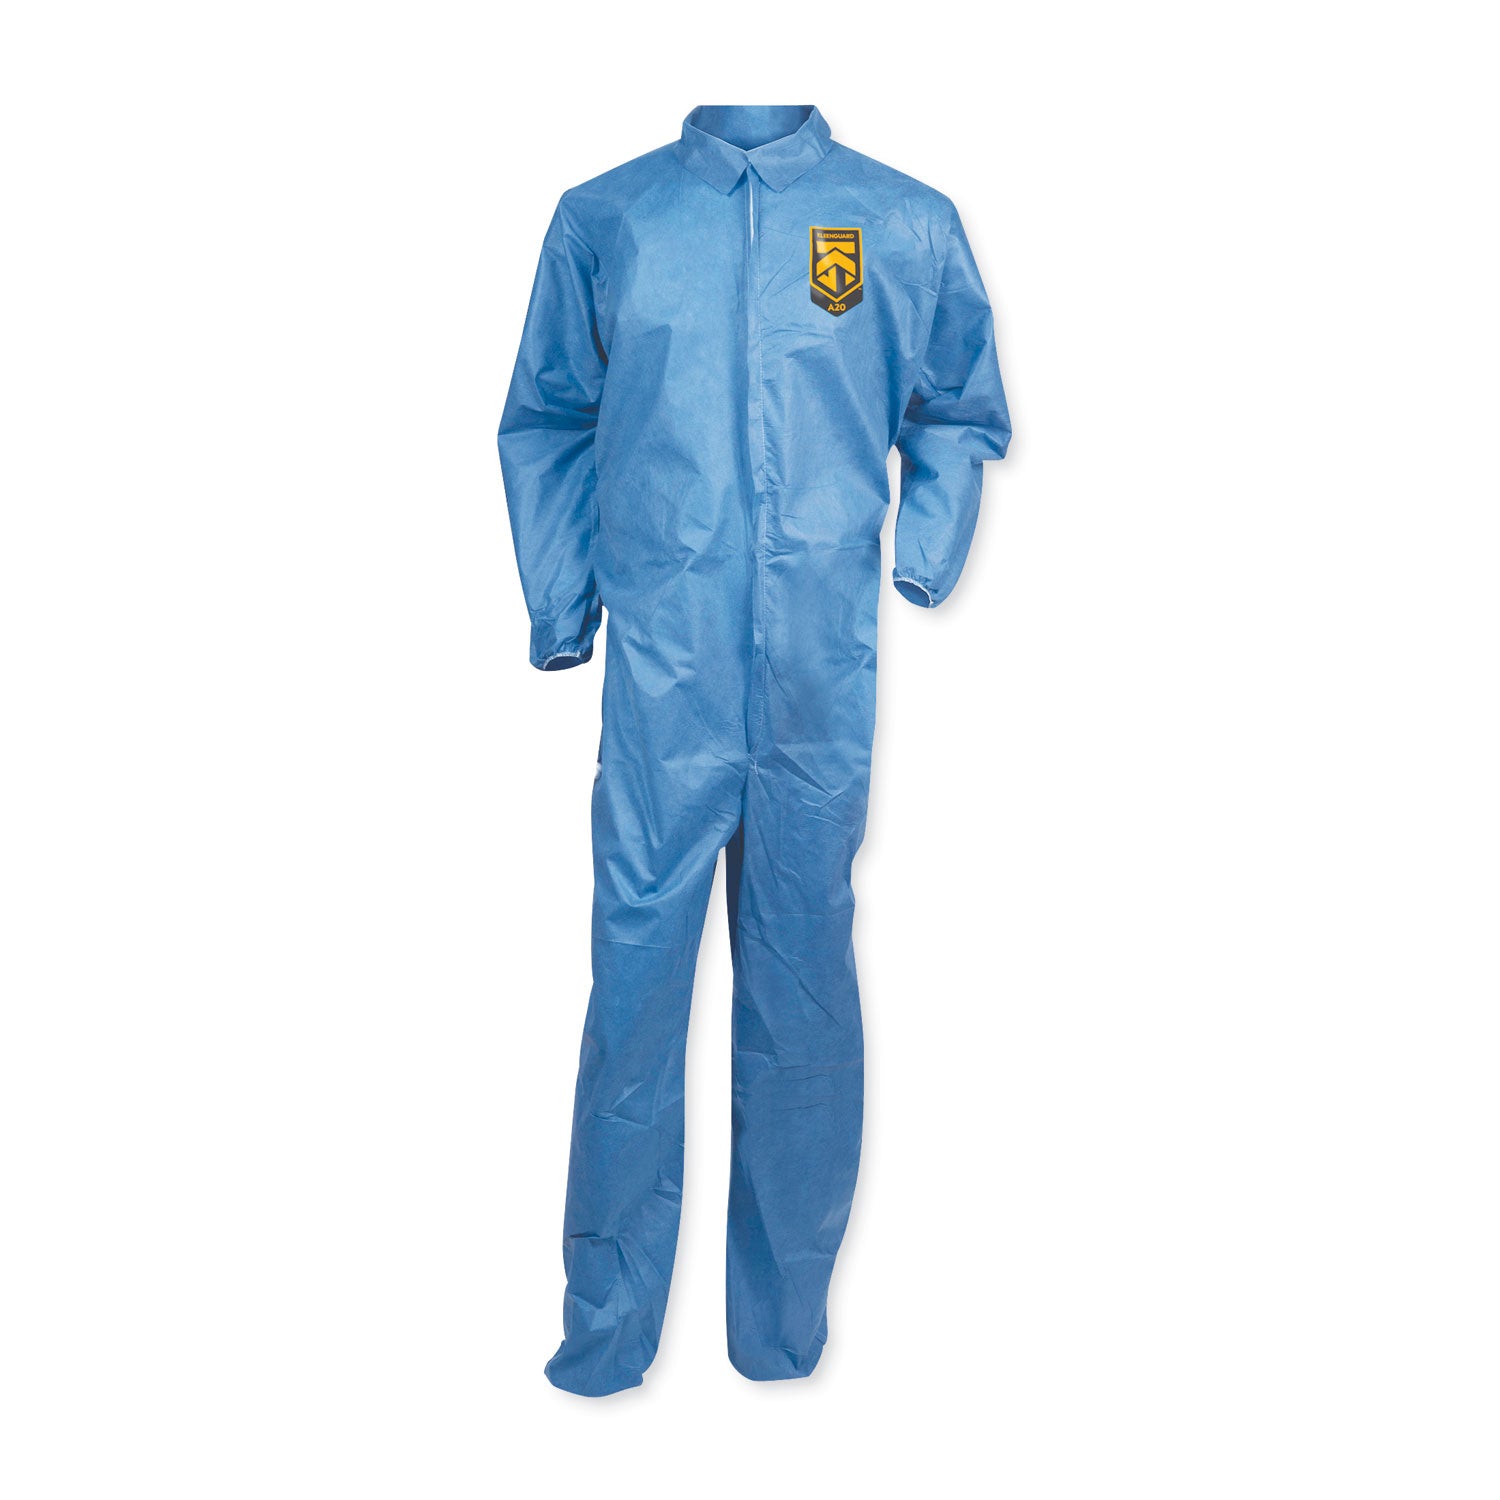 A20 Coveralls, MICROFORCE Barrier SMS Fabric, 2X-Large, Blue, 24/Carton - 